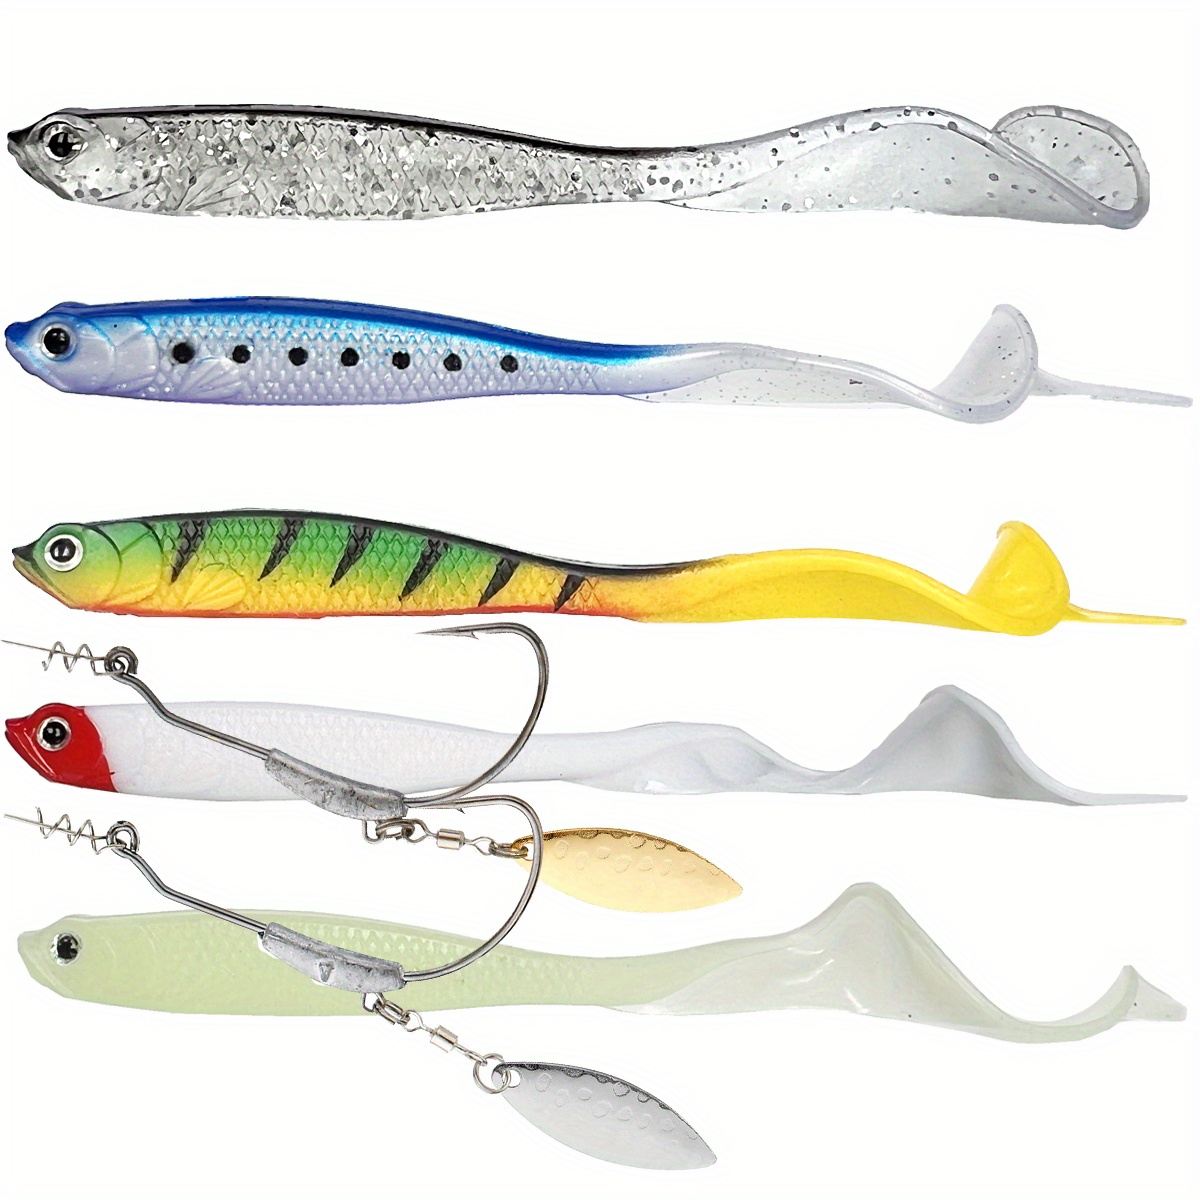 Lollipop Lures Tai Rubber tenzo Solid Colors Saltwater Tai Rubber Fishing 